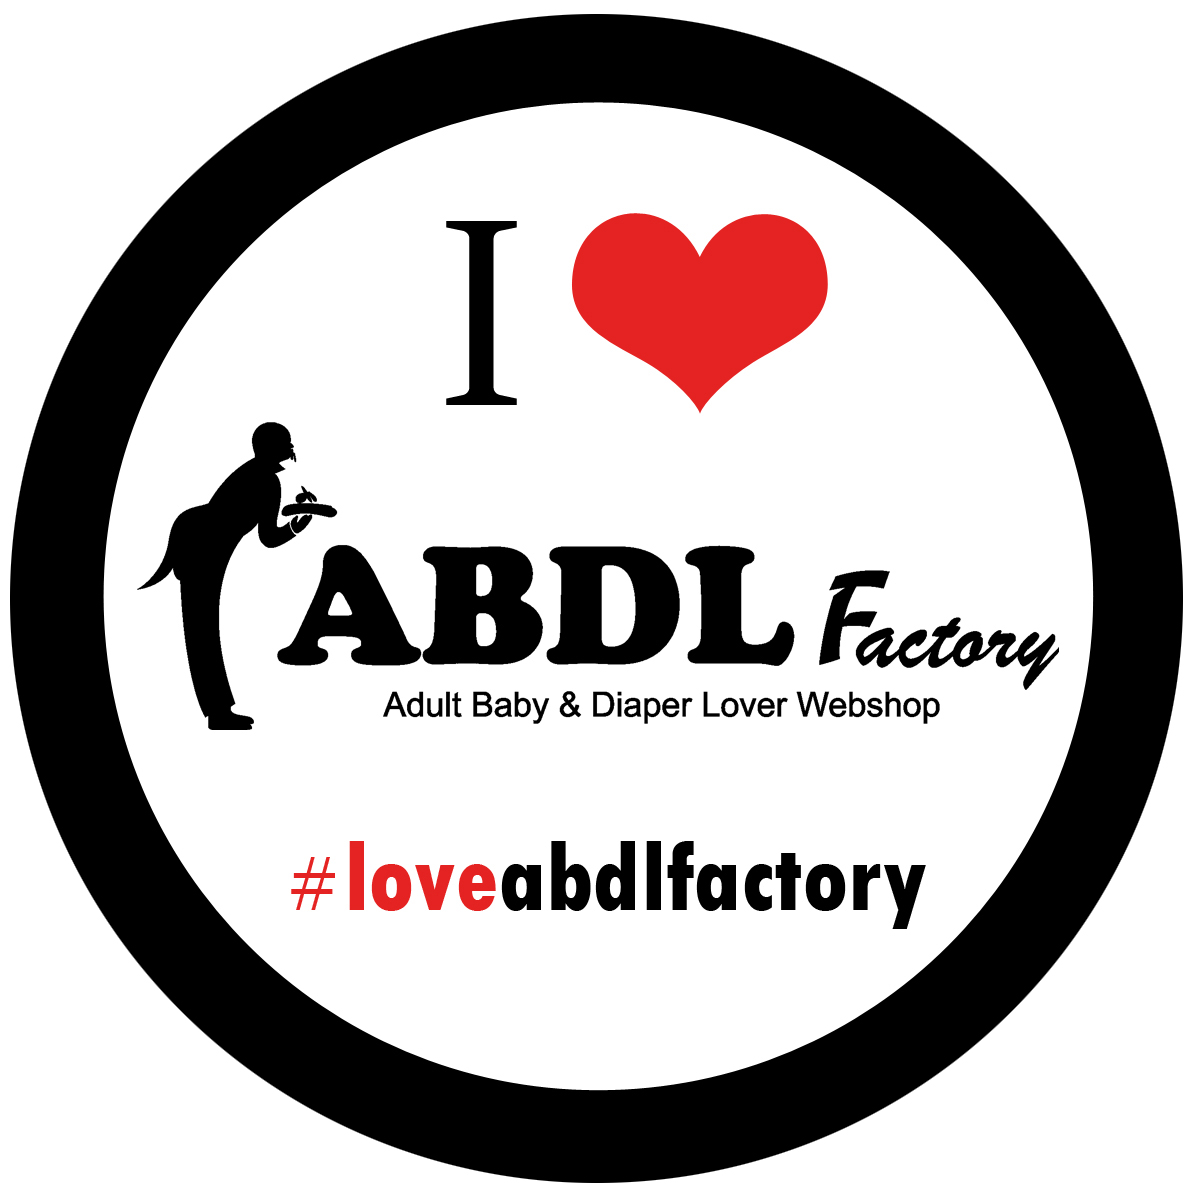 ABDLfactory Picture & Video Contest